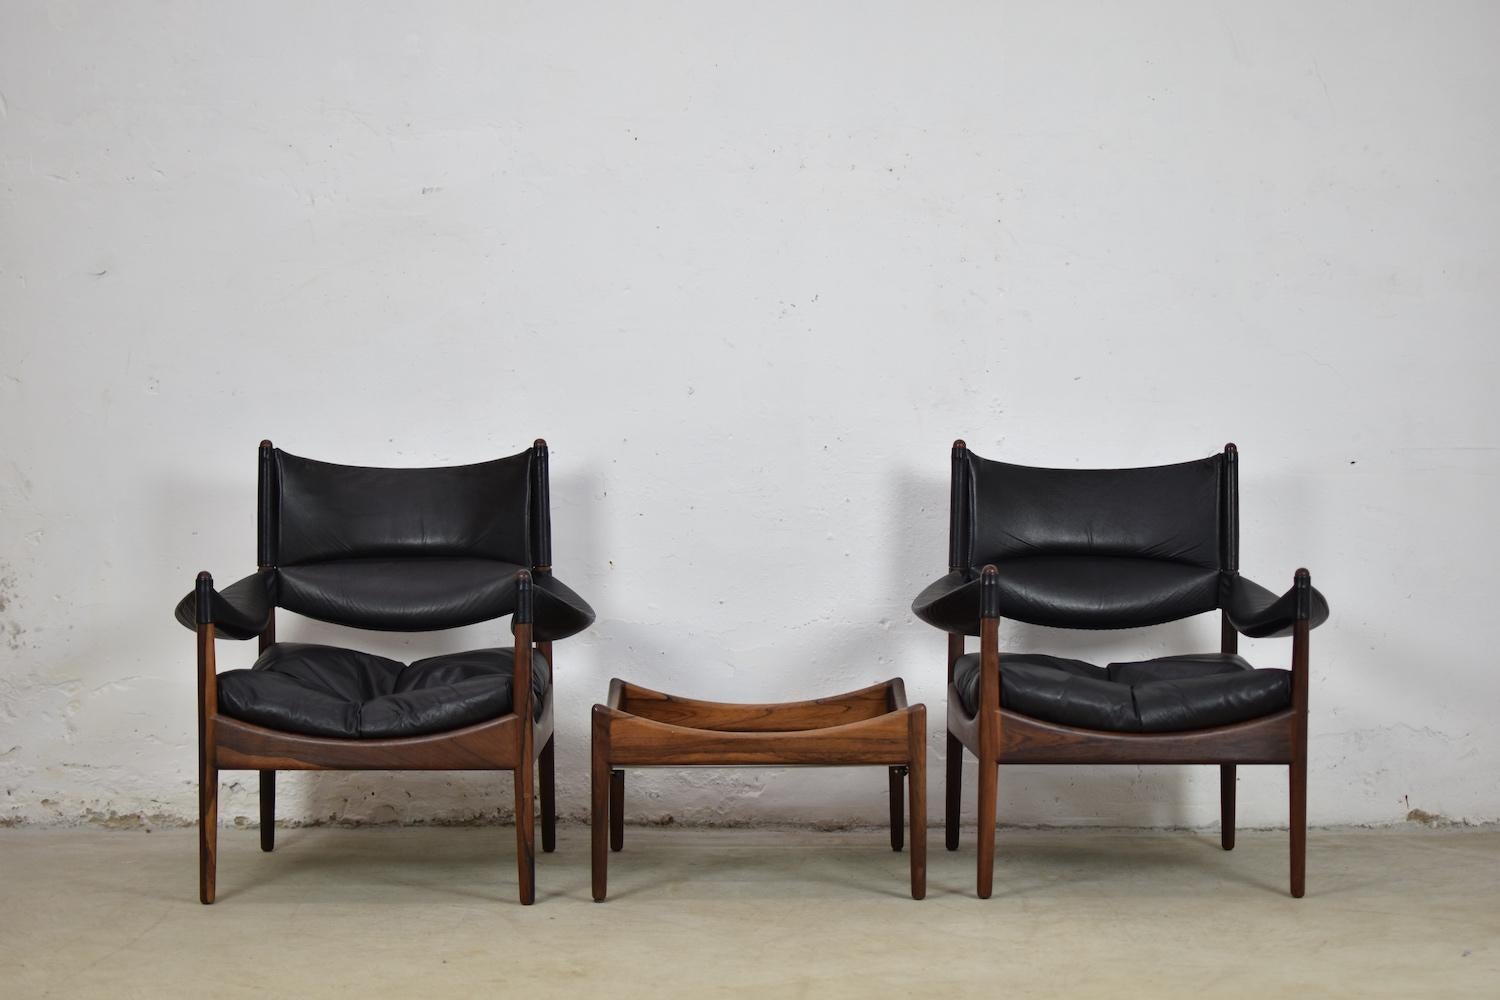 Rare ‘Modus’ seating group by Kristian Vedel for Søren Willadsen Møbelfabrik, Denmark, 1963. This set features two easy chairs with its matching ottoman and side table. All made out of solid rosewood and the original black leather upholstery.